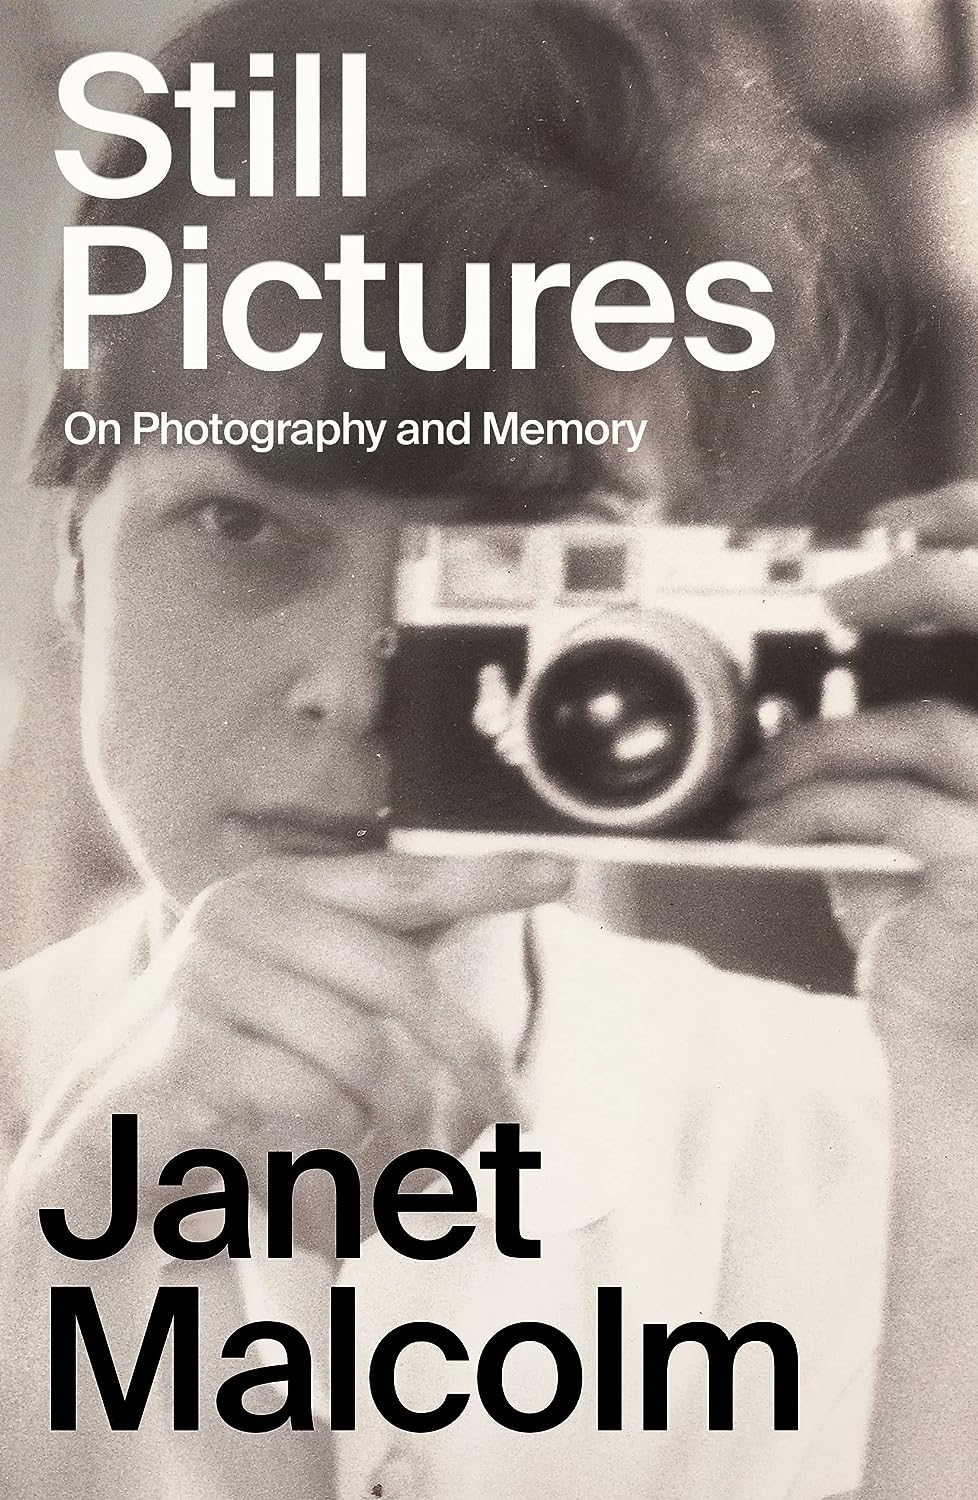 The cover of Still Pictures: On Photography and Memory